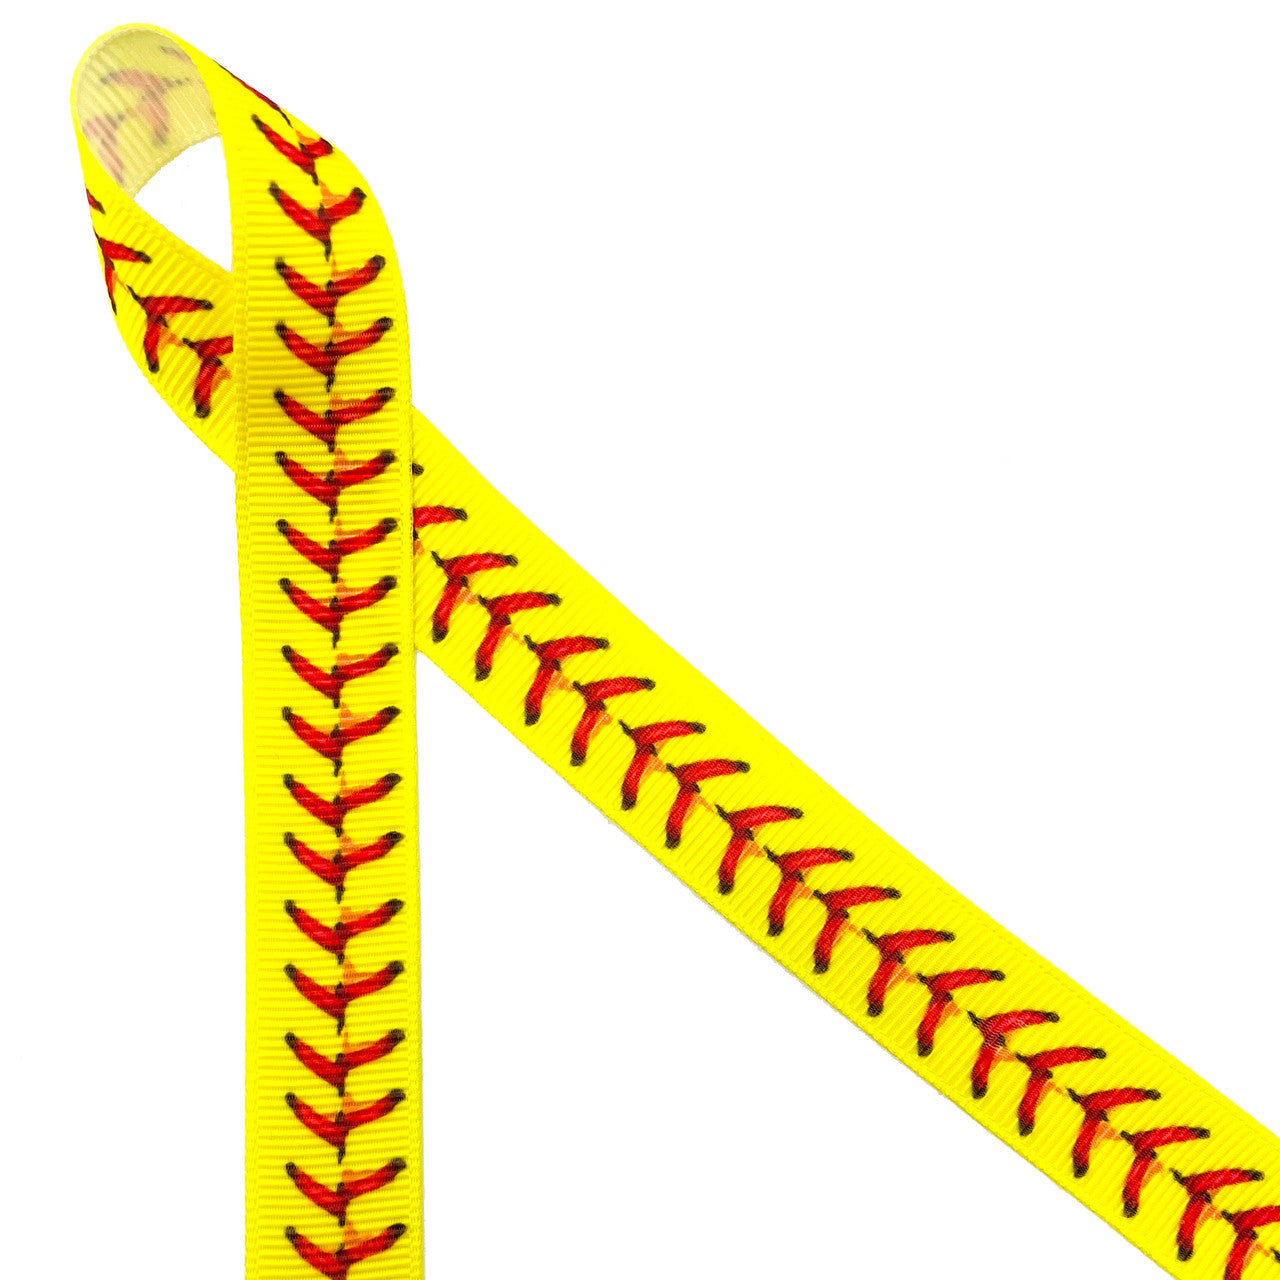 Spring and Summer are for softball games! Soft ball stitches in red on a bright yellow background printed on 5/8" white grosgrain  is ideal for your favorite player! This ribbon is perfect for gift wrap, gift baskets, awards banquets, coaches gifts, party decor, party favors, sports banquets, cookies, cake pops and candy favors. This is a fun ribbon for crafts, hair bows, sewing and quilting projects too! All our ribbon is designed and printed in the USA